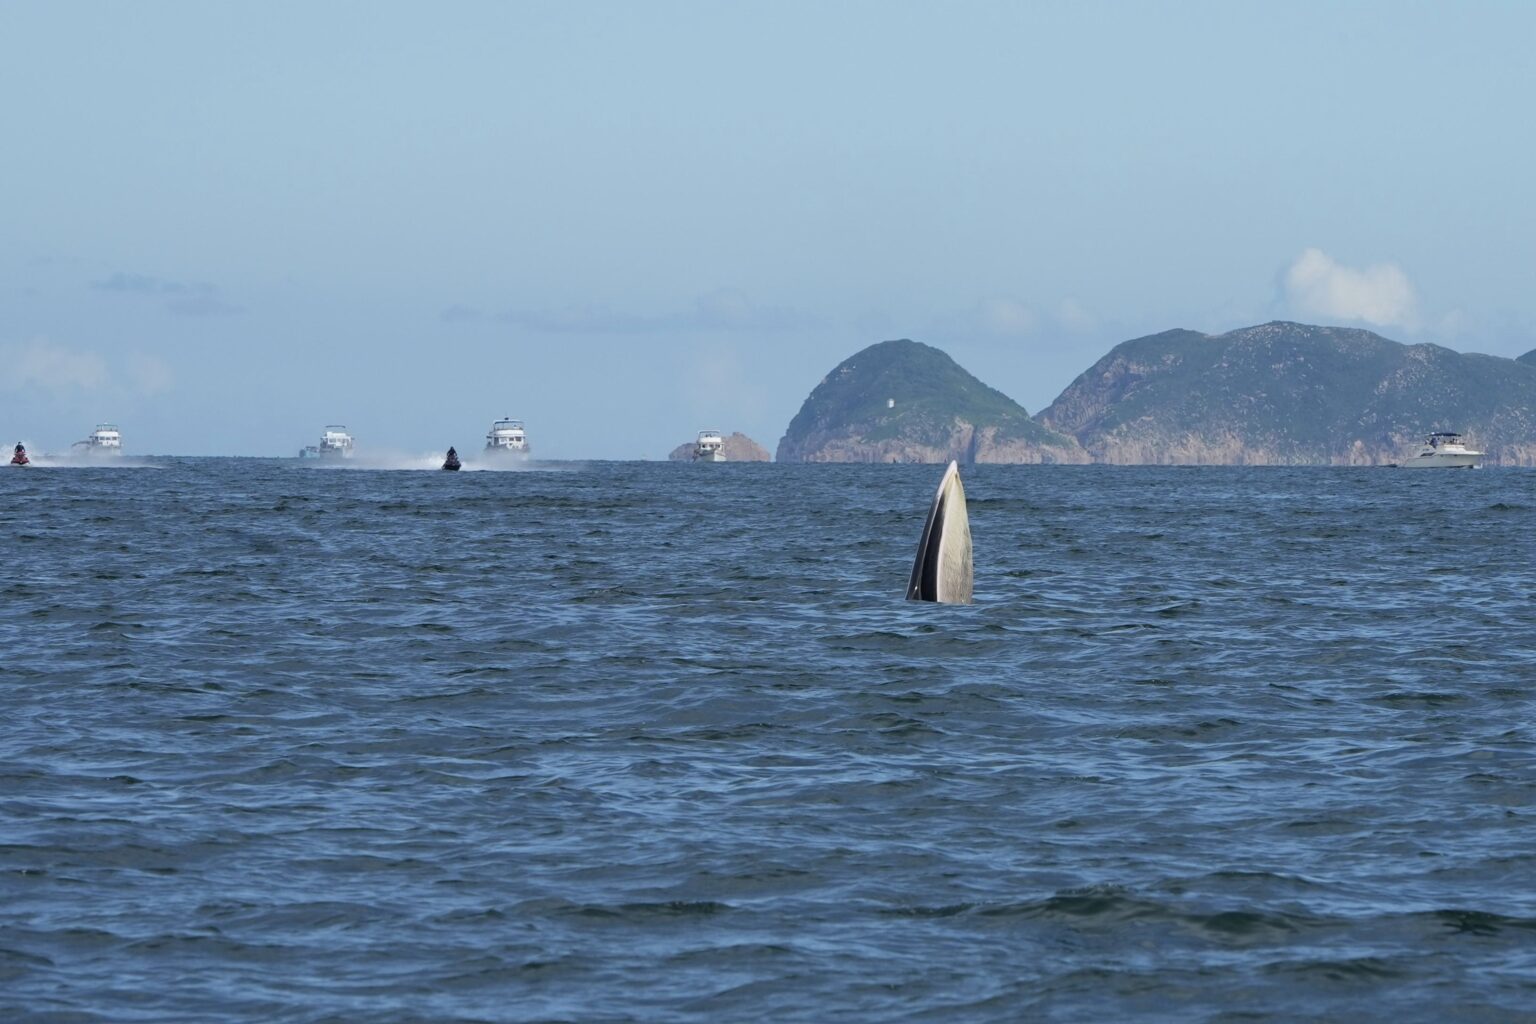 A suspected Bryde's whale feeds in Hong Kong waters, with its mouth protruding out of the surface of the sea. In the background, there are are boats and rocky terrain.